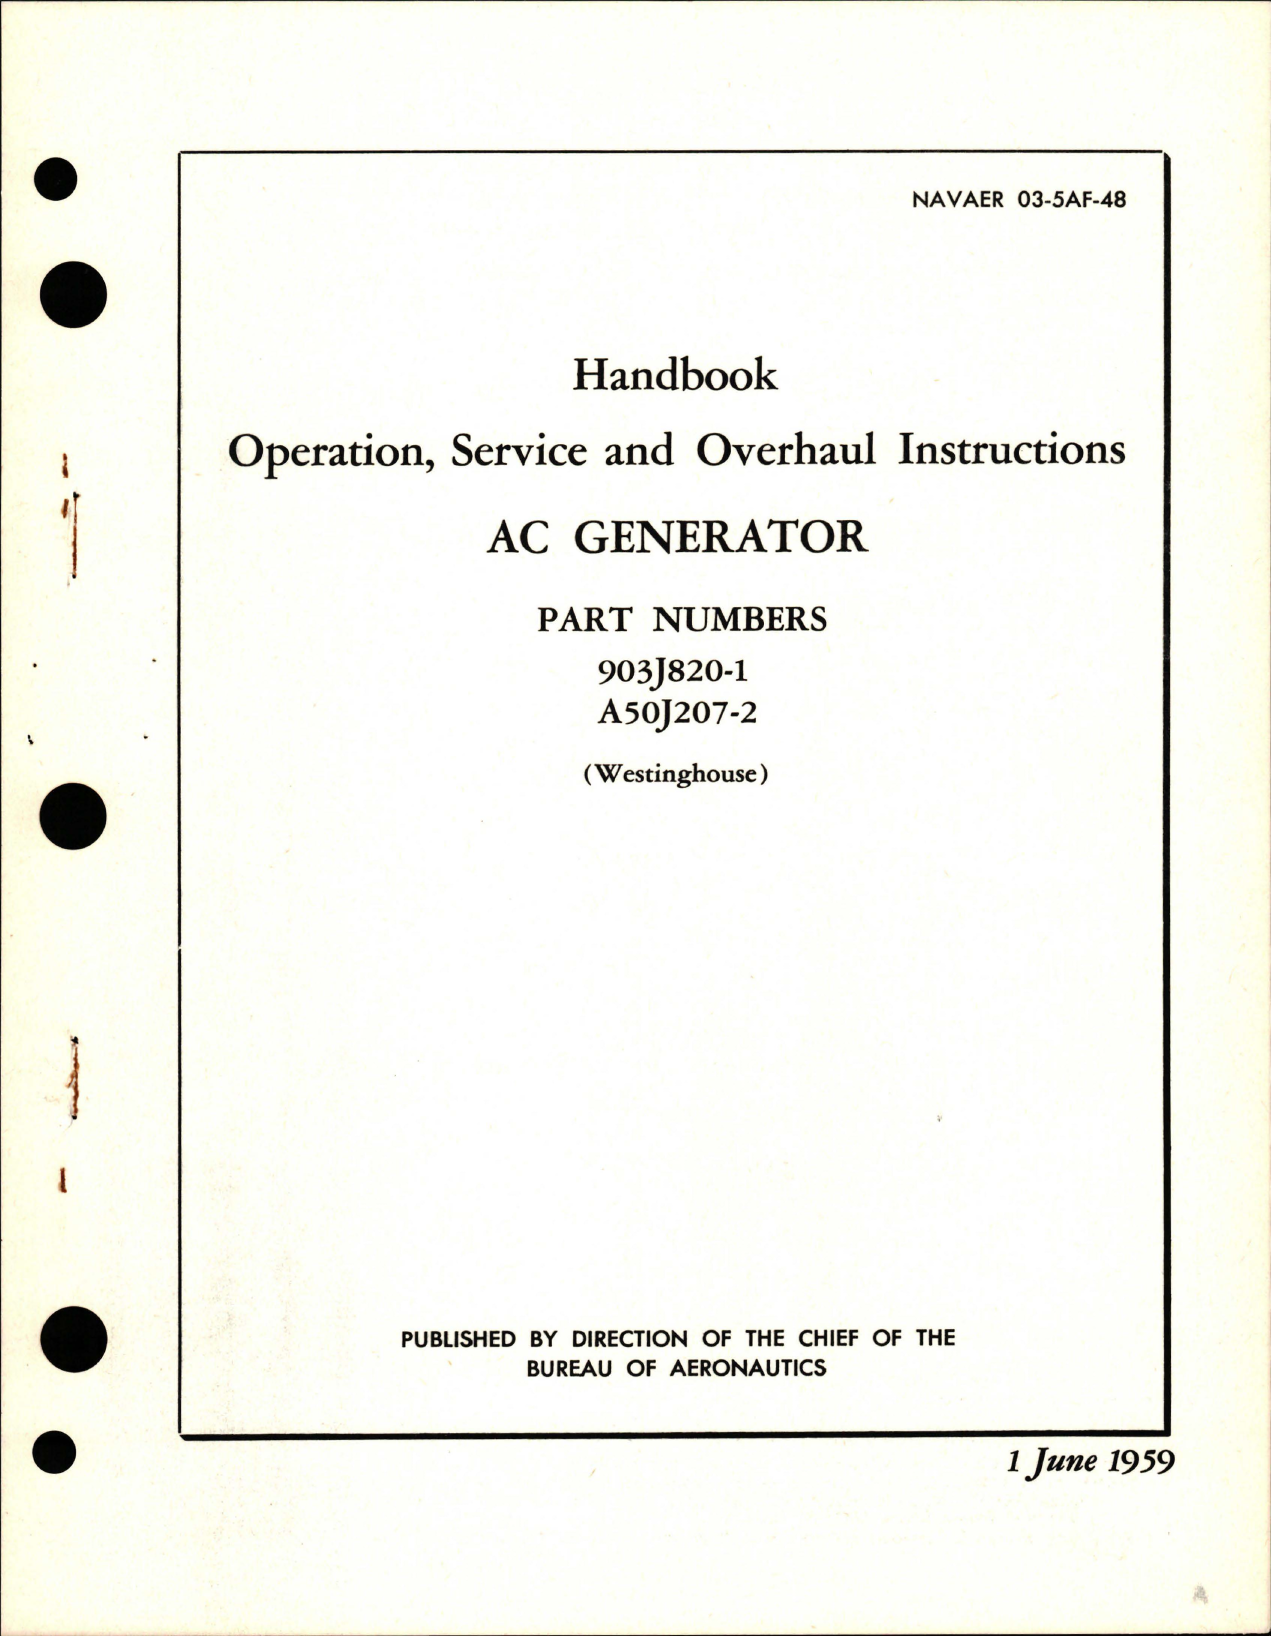 Sample page 1 from AirCorps Library document: Operation, Service and Overhaul Instructions for AC Generator - Parts 903J820-1 and A50J207-2 